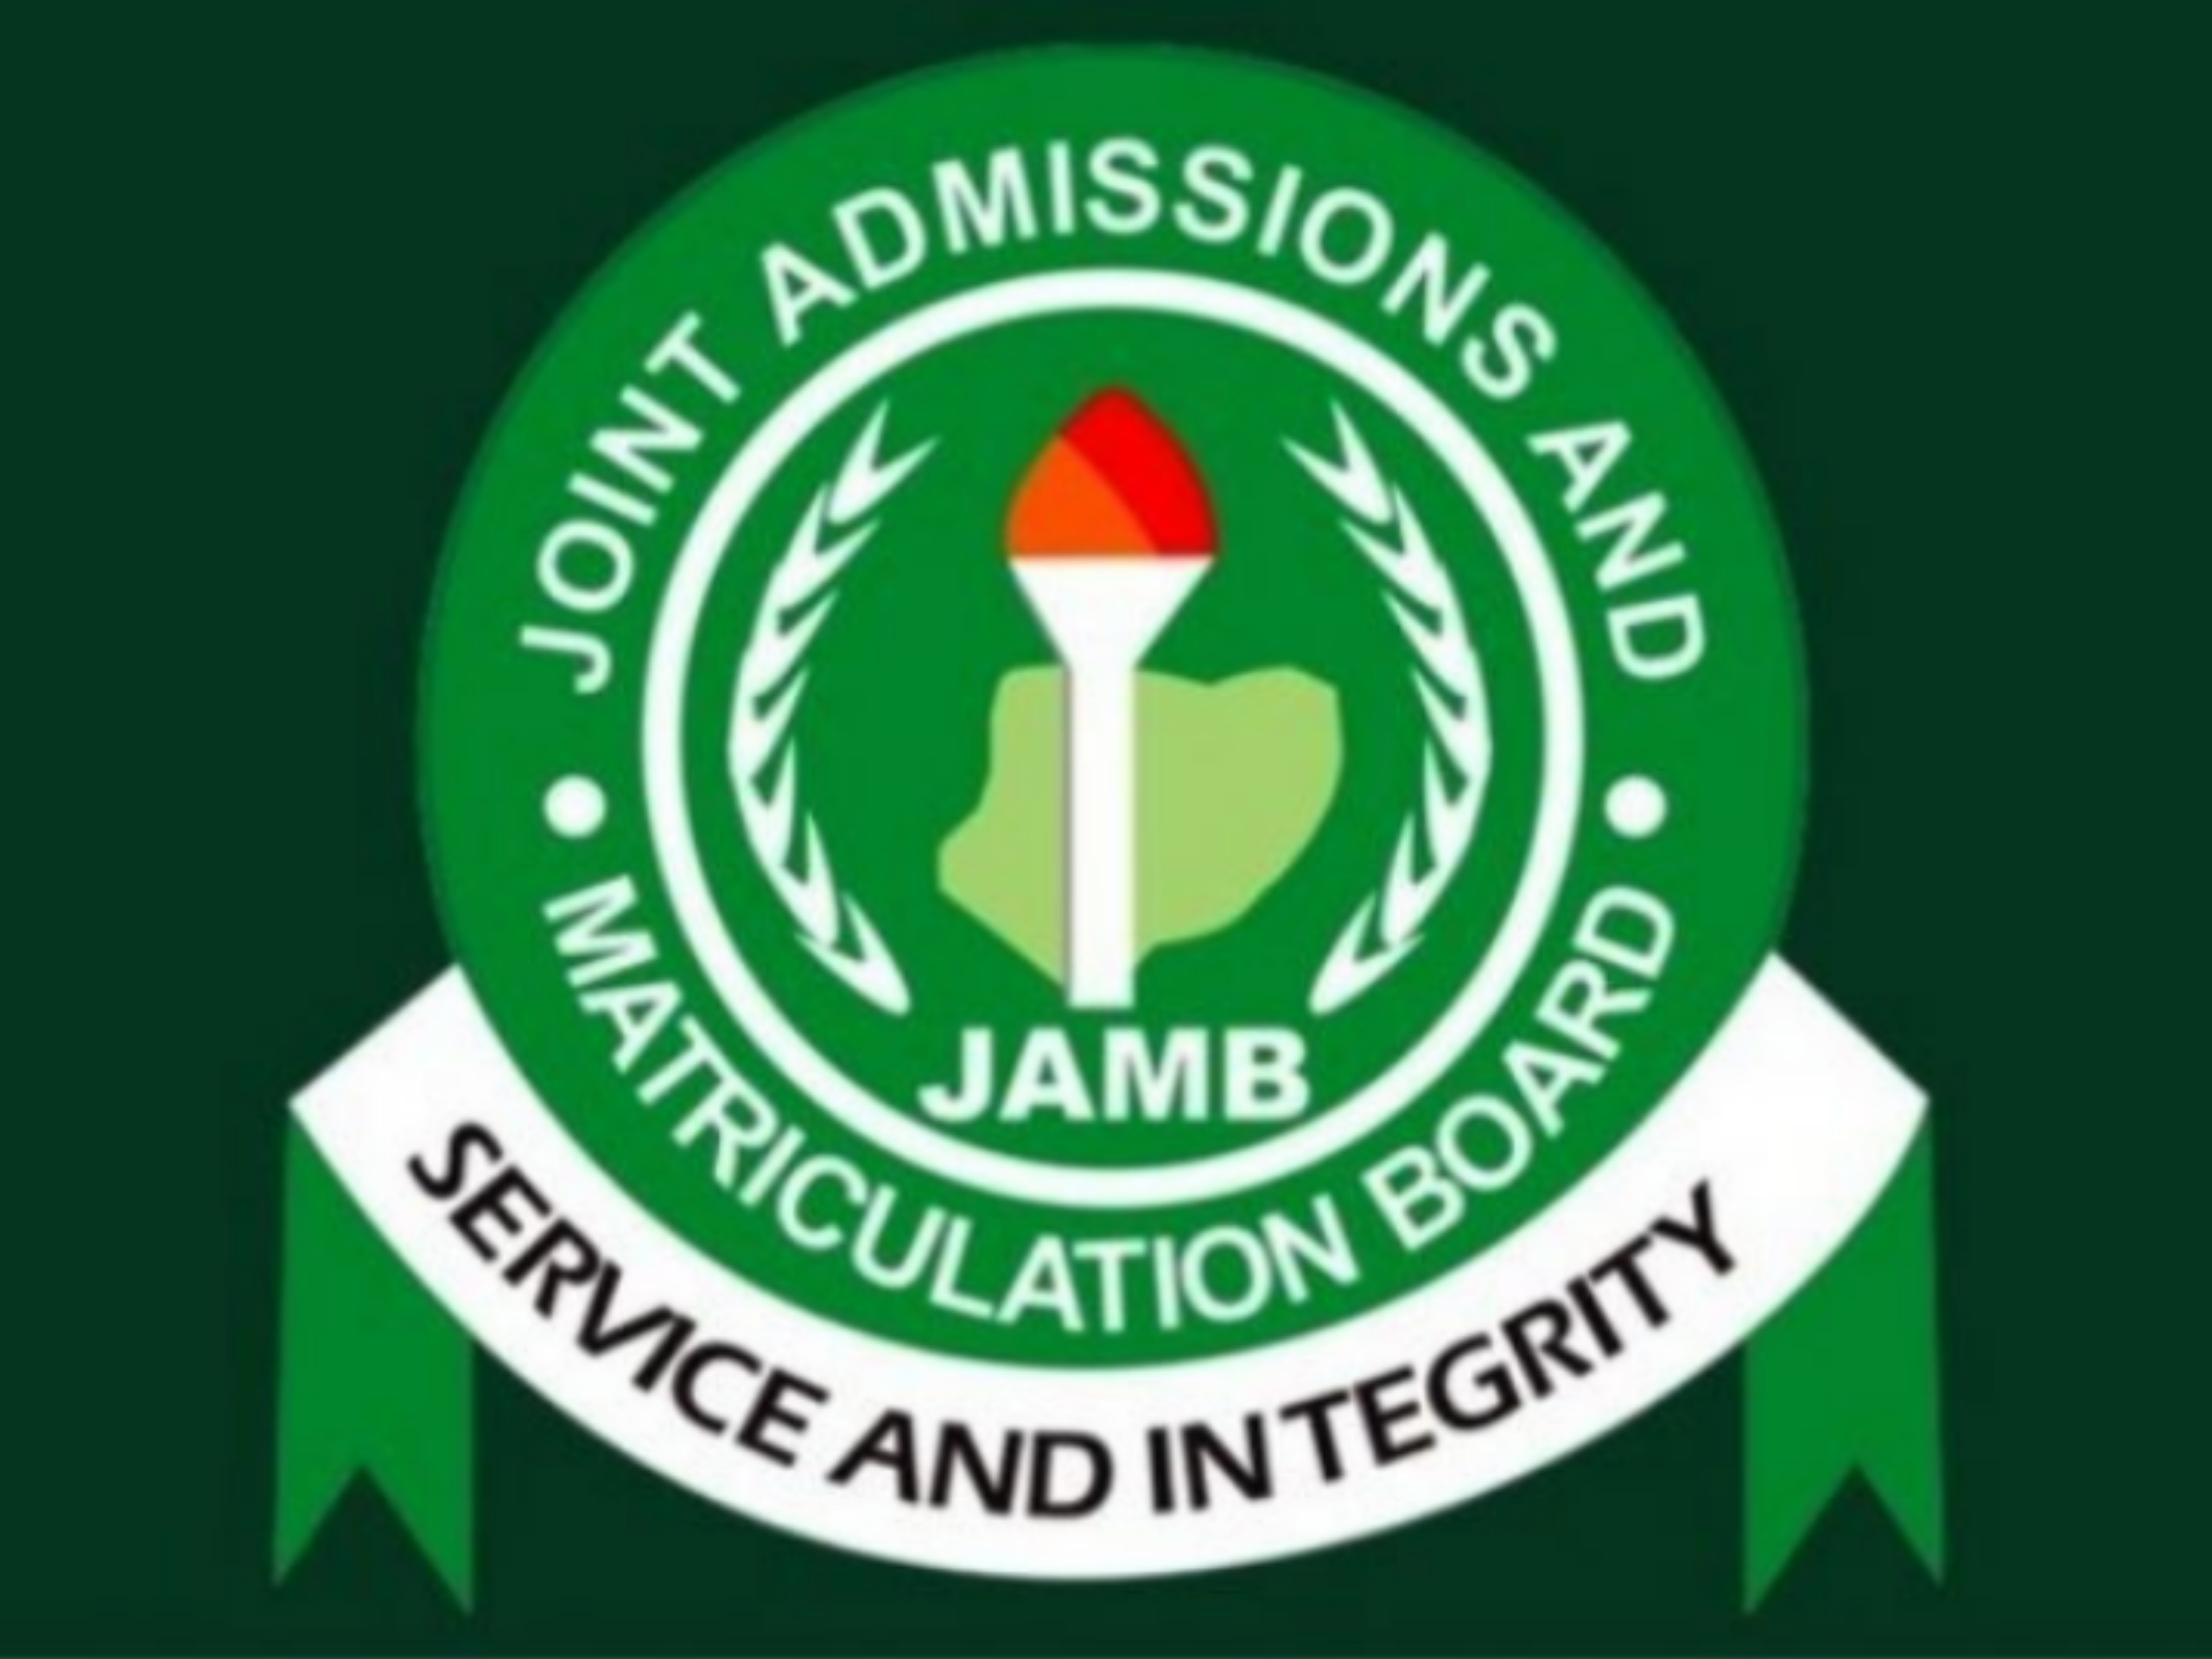 JAMB remits N3.5bn to FG as surplus generated during 2021 exam registration